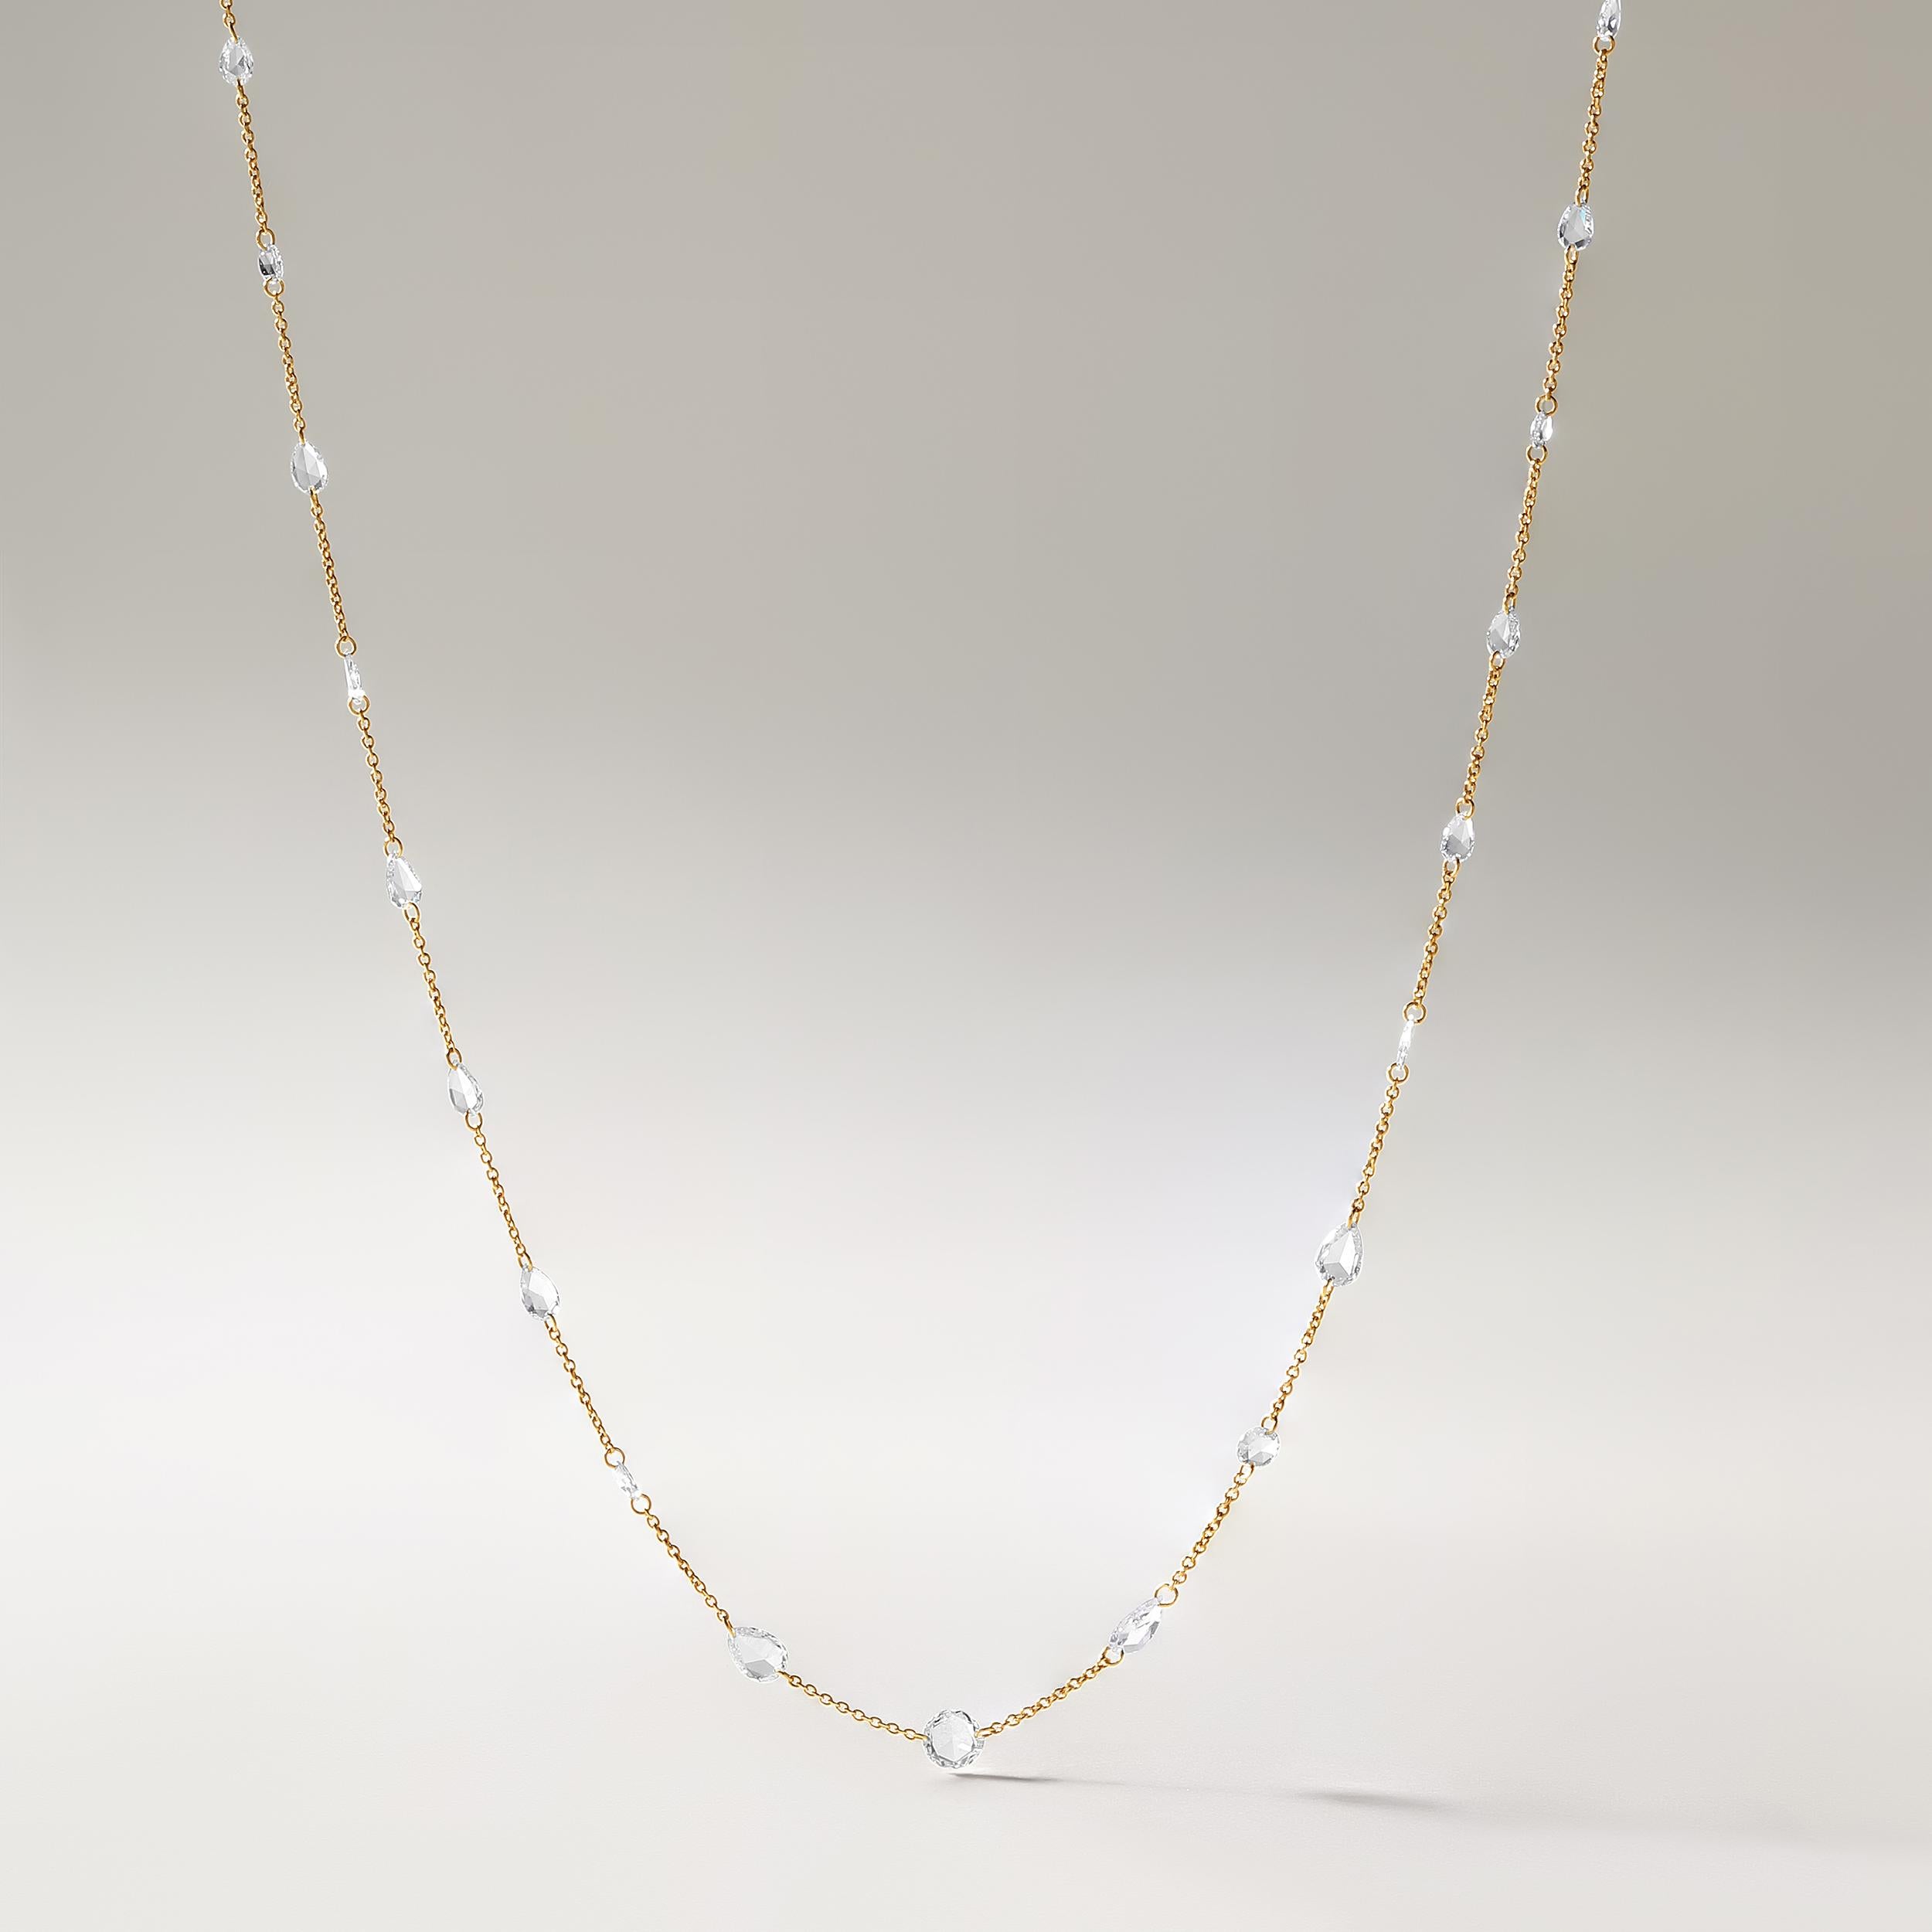 Crafted in 2 grams of 18K Yellow Gold, the necklace contains 21 stones of Pear and Round Shaped Rose Cut Natural Natural Diamonds with a total of 2.58 carat in F-G color and VS clarity. The necklace length is 18 inches.
CONTEMPORARY AND TIMELESS